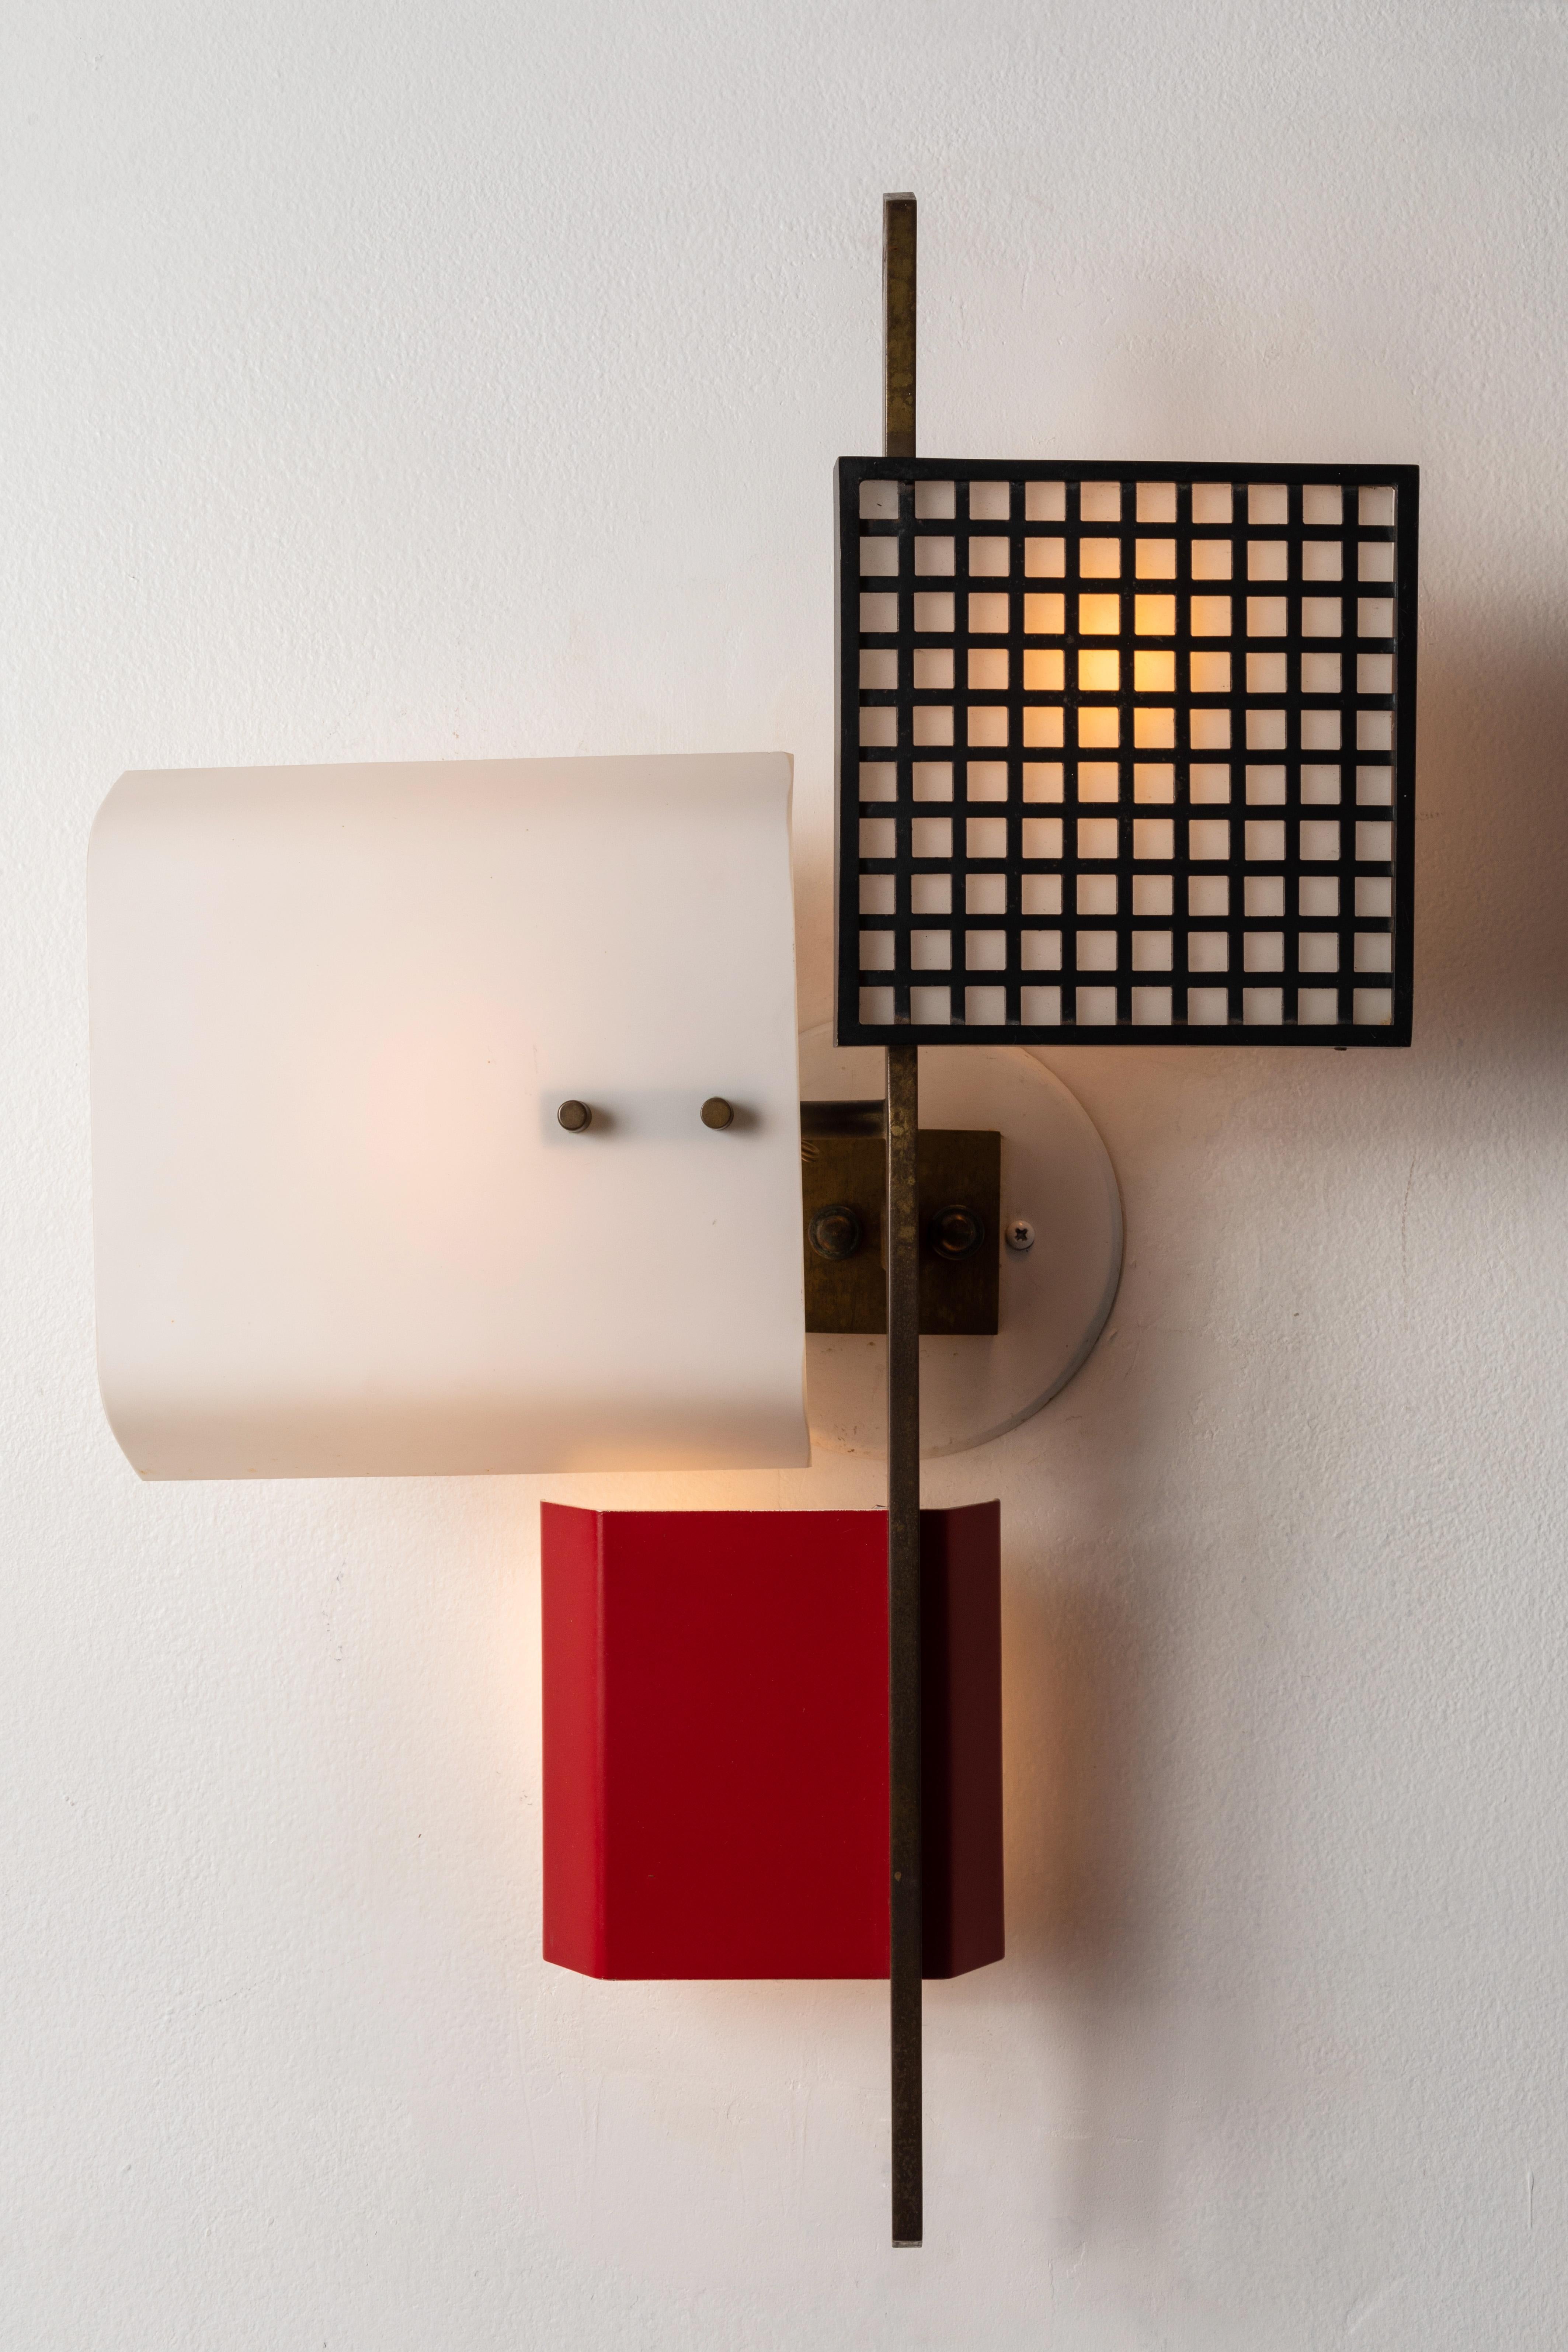 Large 1950s 3-panel wall light attributed to Oscar Torlasco executed in satin opaline glass, red painted metal and patinated brass. Professionally rewired for US electrical.  An exquisite sculptural lamp of incomparable refinement.

Lumi was one